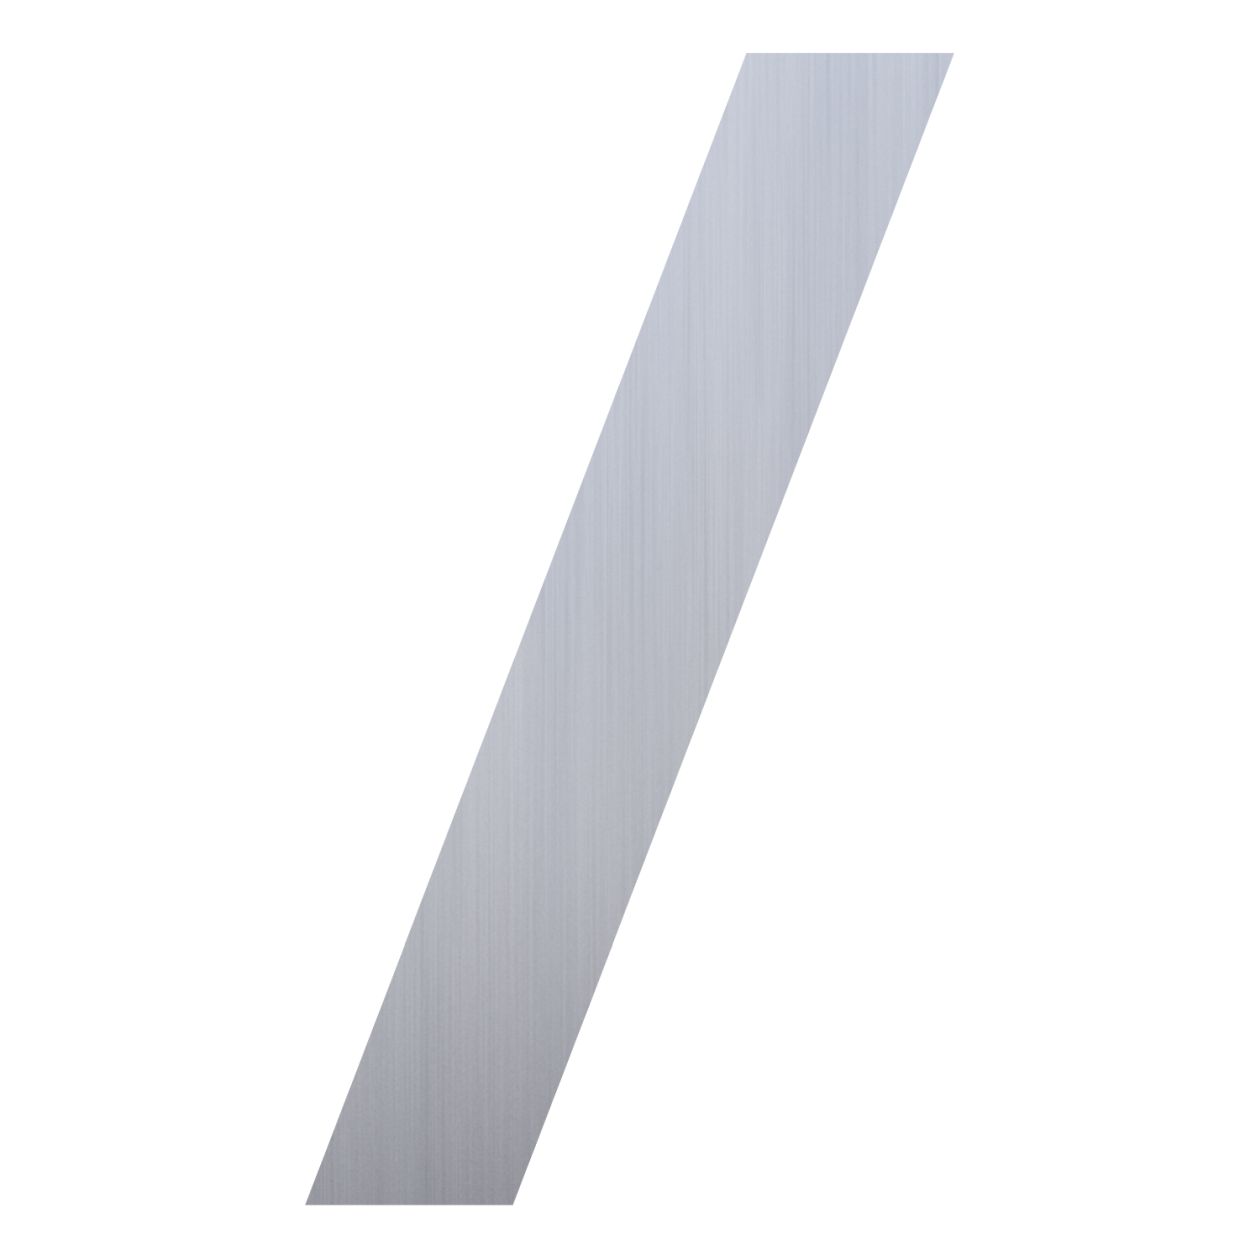 House Numbers by Bravios (stainless steel)